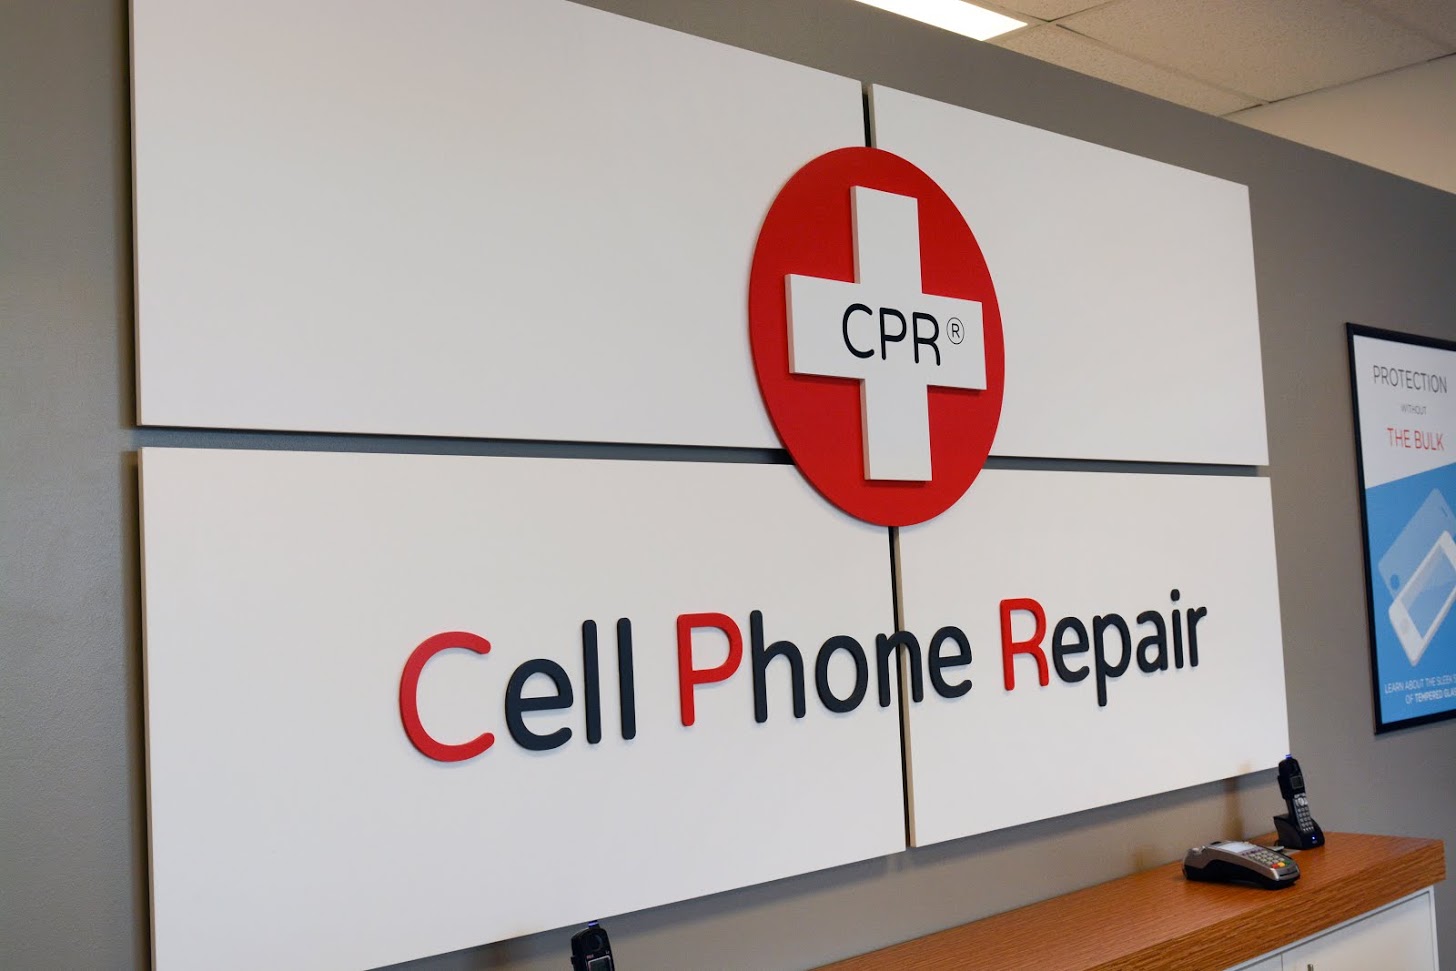 CPR Cell Phone Repair, Friday, January 17, 2020, Press release picture